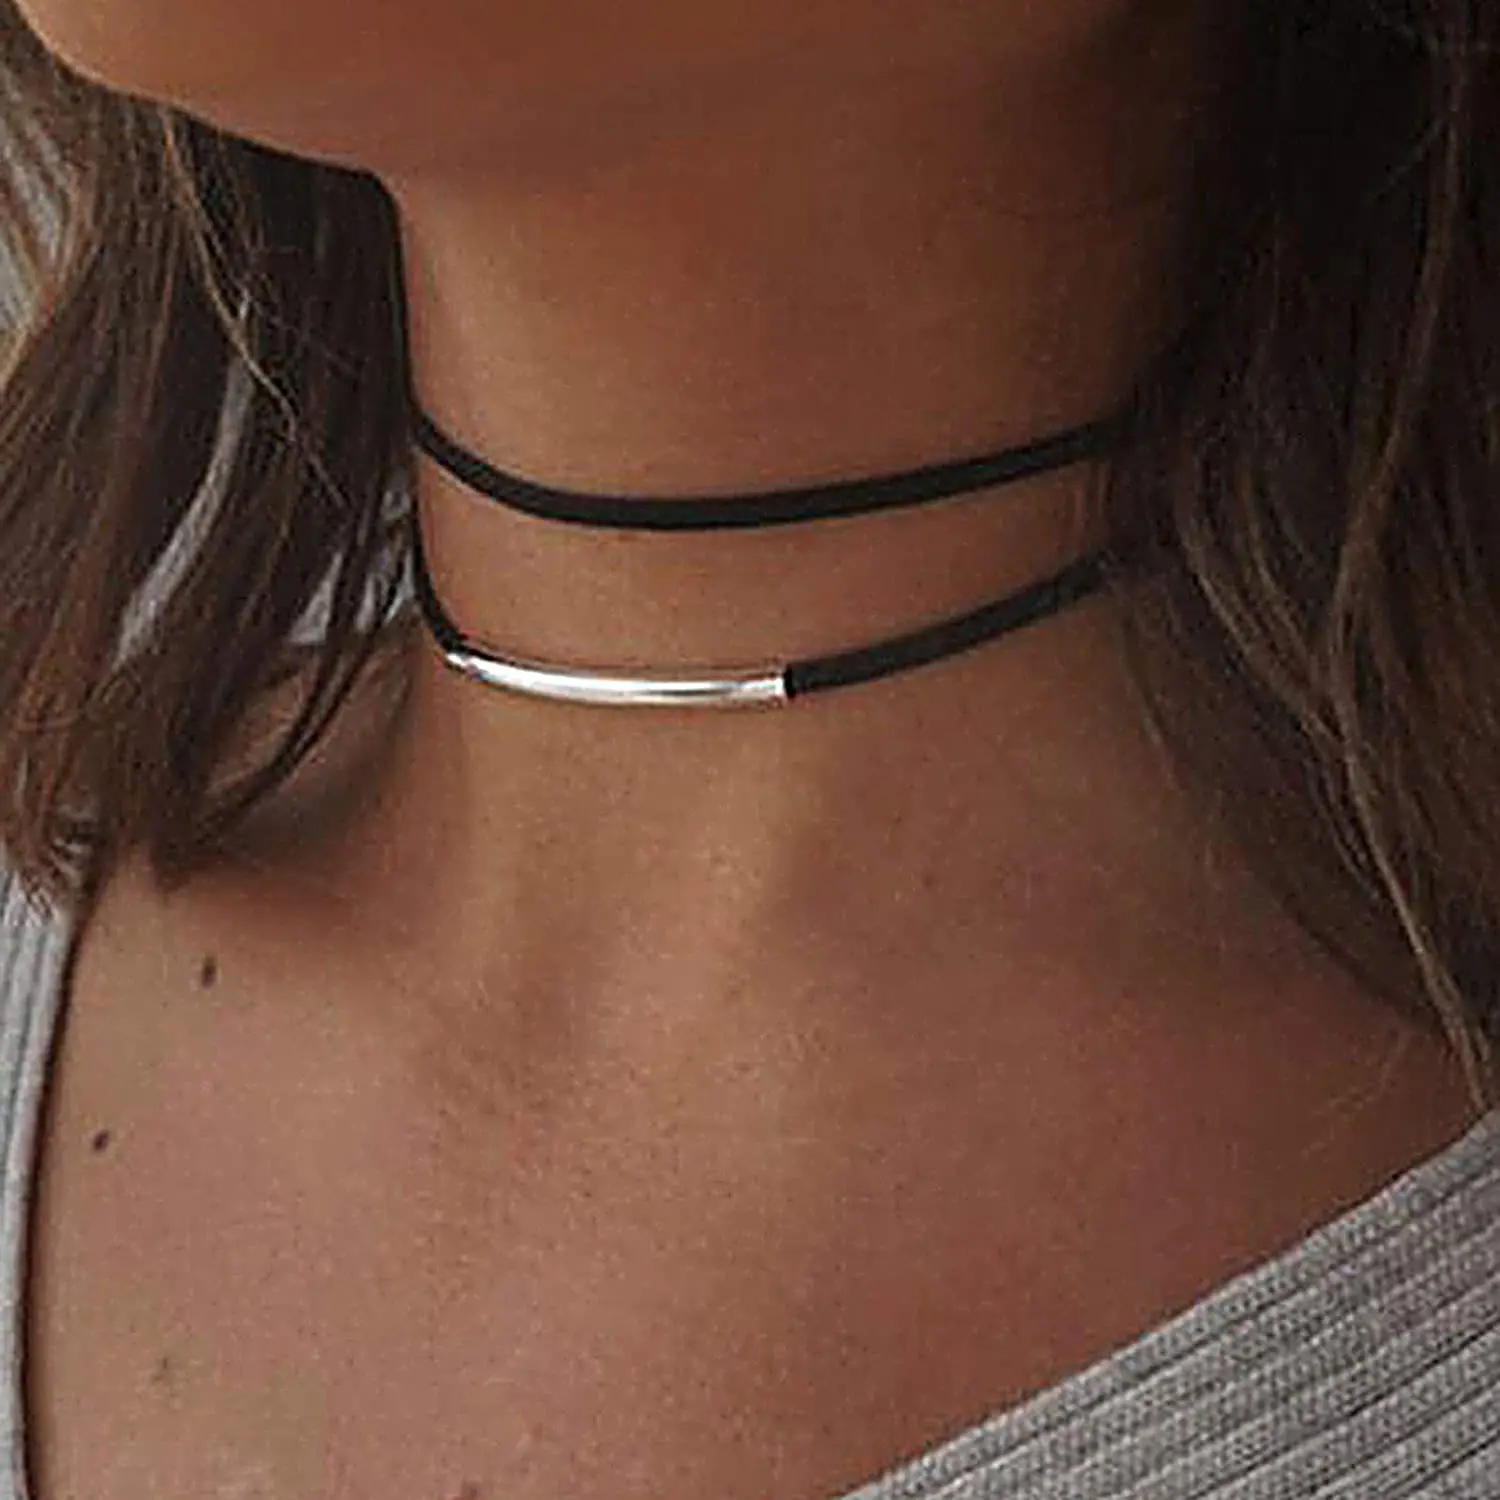 Ladies Layer Black Choker Necklace Adjustable Black Collar Necklaces Metal Tube Necklace For Women And Girls - Necklace -